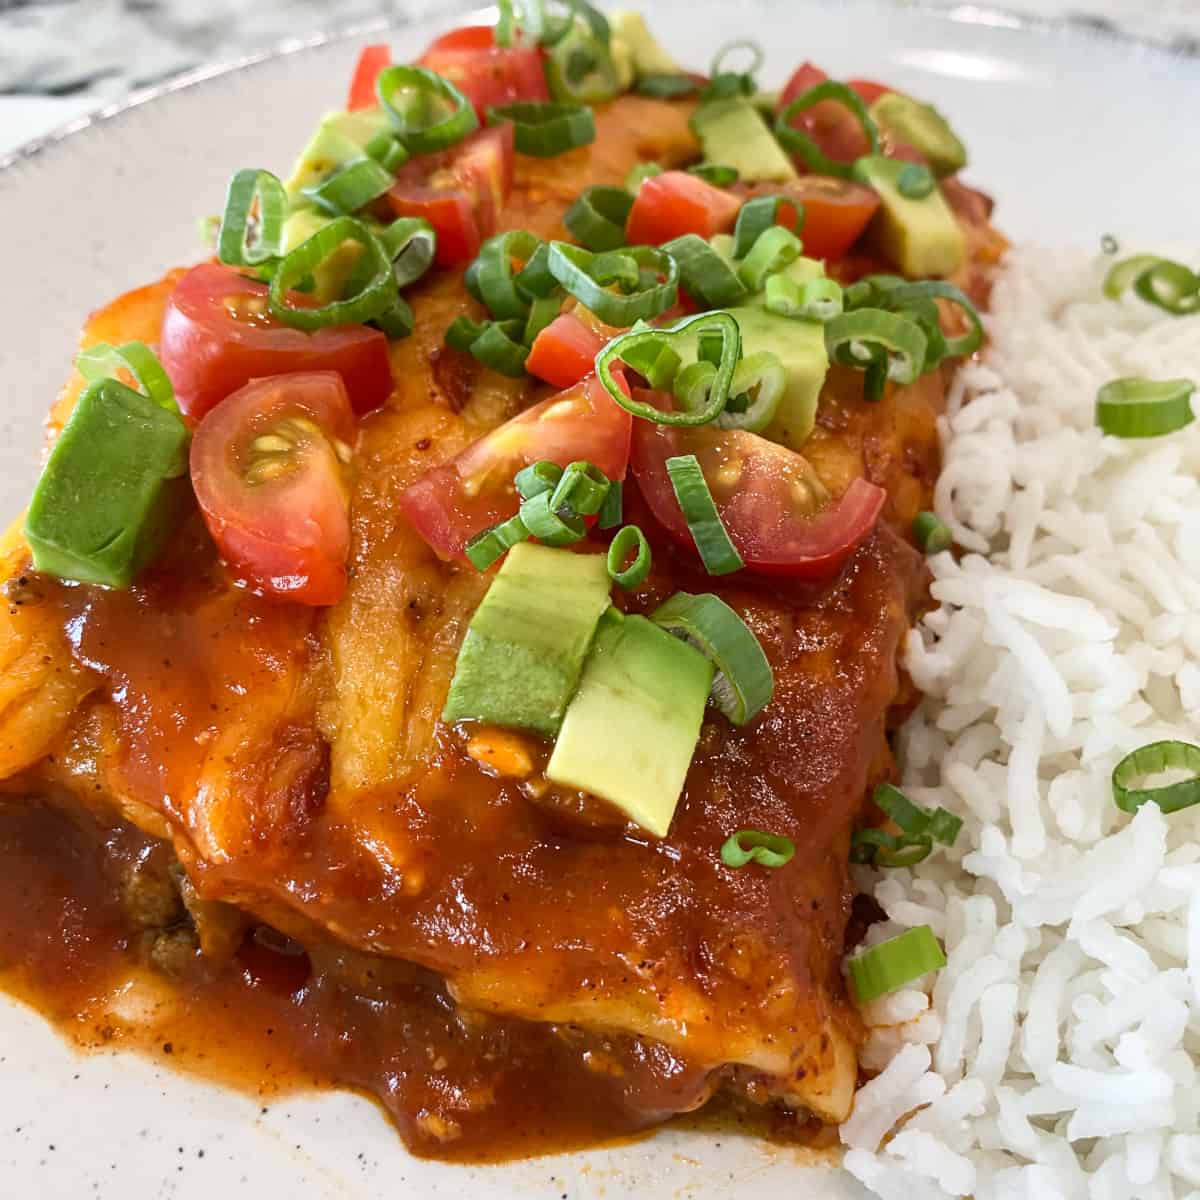 Enchiladas on a plate with white rice and green oinion garnish.